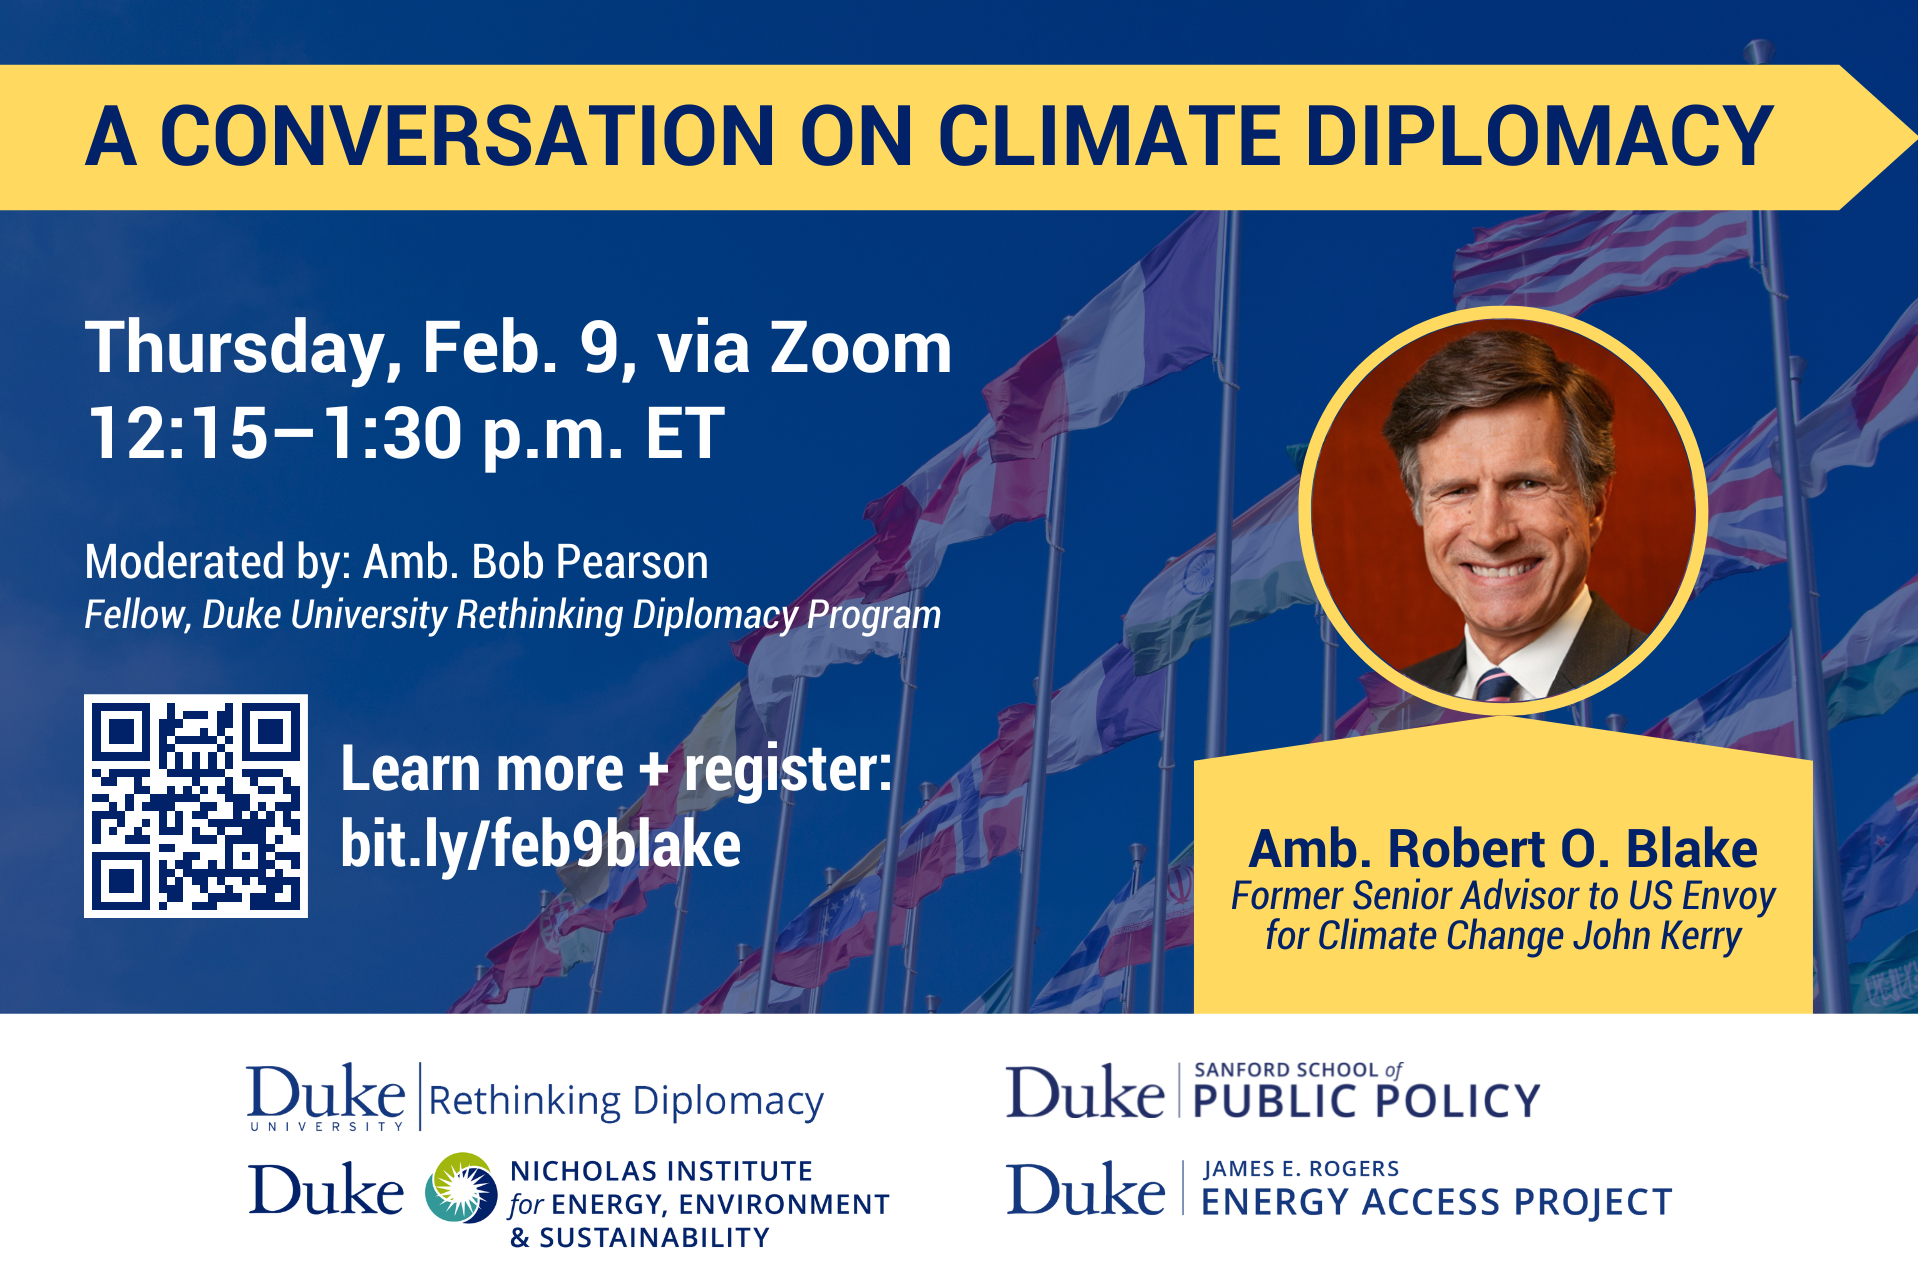 Background image of several national flags on flag poles. Title: &amp;amp;amp;amp;amp;amp;quot;A Conversation on Climate Diplomacy.&amp;amp;amp;amp;amp;amp;quot; Headshot of speaker over text: &amp;amp;amp;amp;amp;amp;quot;Amb. Robert O. Blake, Former Senior Advisor to US Envoy for Climate Change John Kerry.&amp;amp;amp;amp;amp;amp;quot; Text: &amp;amp;amp;amp;amp;amp;quot;Thursday, Feb. 9, via Zoom. 12:15–1:30 p.m. ET. Moderated by: Amb. Bob Pearson, Fellow, Duke University Rethinking Diplomacy. Program. Learn more + register: bit.ly/feb9blake.&amp;amp;amp;amp;amp;amp;quot; Logos at bottom for Rethinking Diplomacy Program, Nicholas Institute, Sanford School, and Energy Access Project. QR code for event to left.